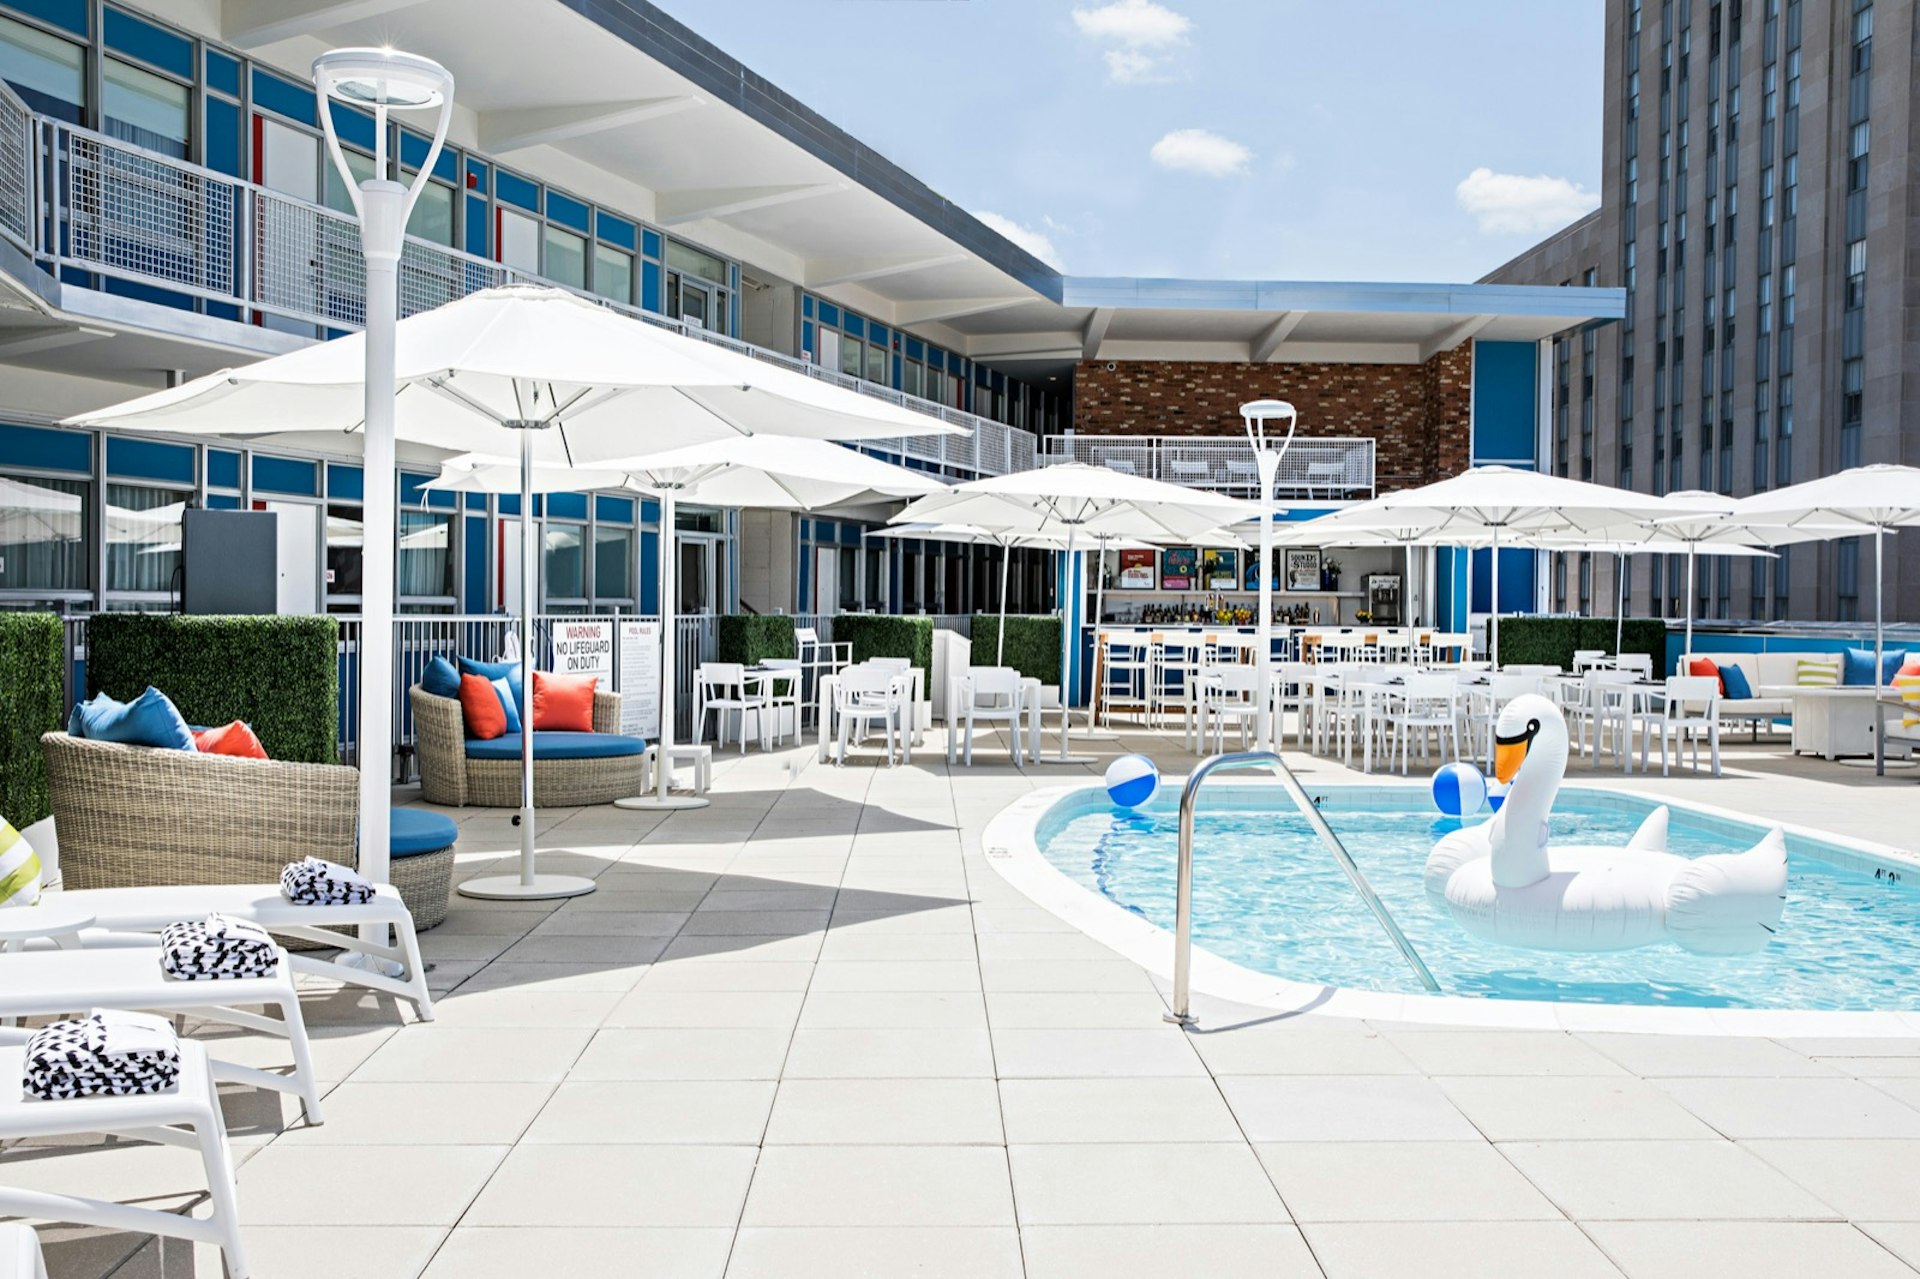 The pool area of Unscripted hotel, with a large inflatable swan and beach balls in the water and umbrellas surrounding